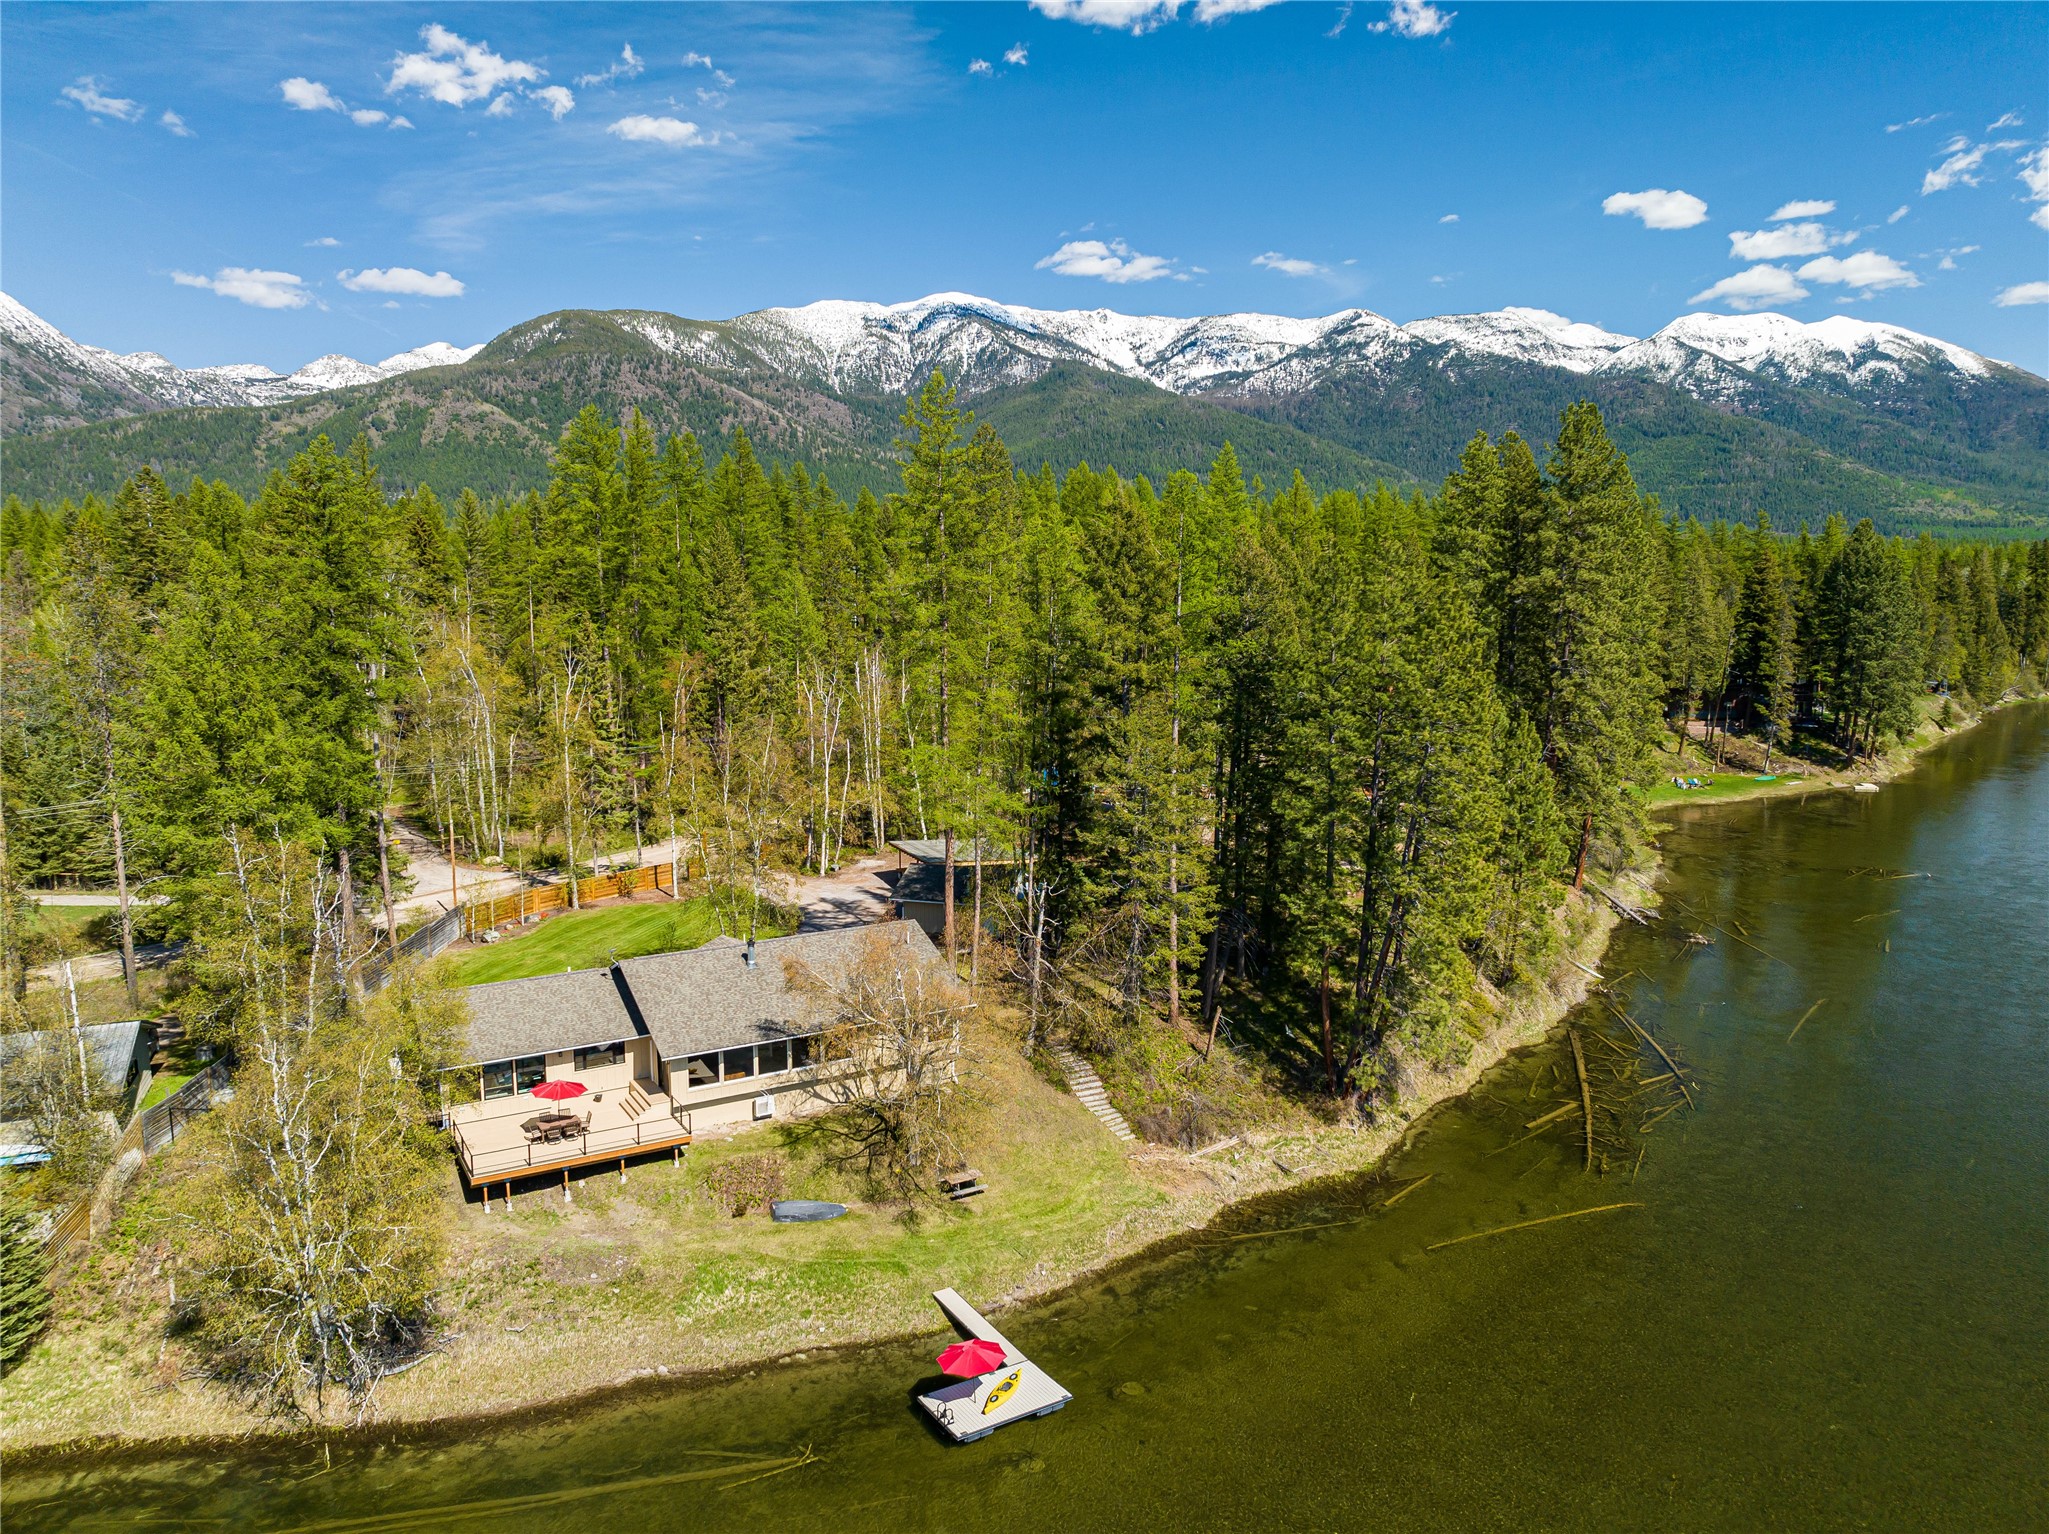 Riverfront property in Bigfork, Montana! Embrace the rhythm of the Swan River from your own private sanctuary. Single-level home whispers tales of Montana magic. With 293 feet of pristine waterfront with private boat dock, it's an invitation to cast off, paddle upstream, or simply marvel at the ever-changing river ballet from your expansive windows. Add a shop across the road . Two master suites offer luxurious retreats, while the new 600-square-foot waterfront deck becomes your stage for sunset celebrations and starlit reflections. New 22 kw back up propane generator and 2, 50 gallon water tanks. New doors and windows, heated flooring in master bath, walk in closet, mud room and laundry. Fenced for kids/pets with electronic security gate. No development can take place across the river.  
Listed by Bret Richmond.